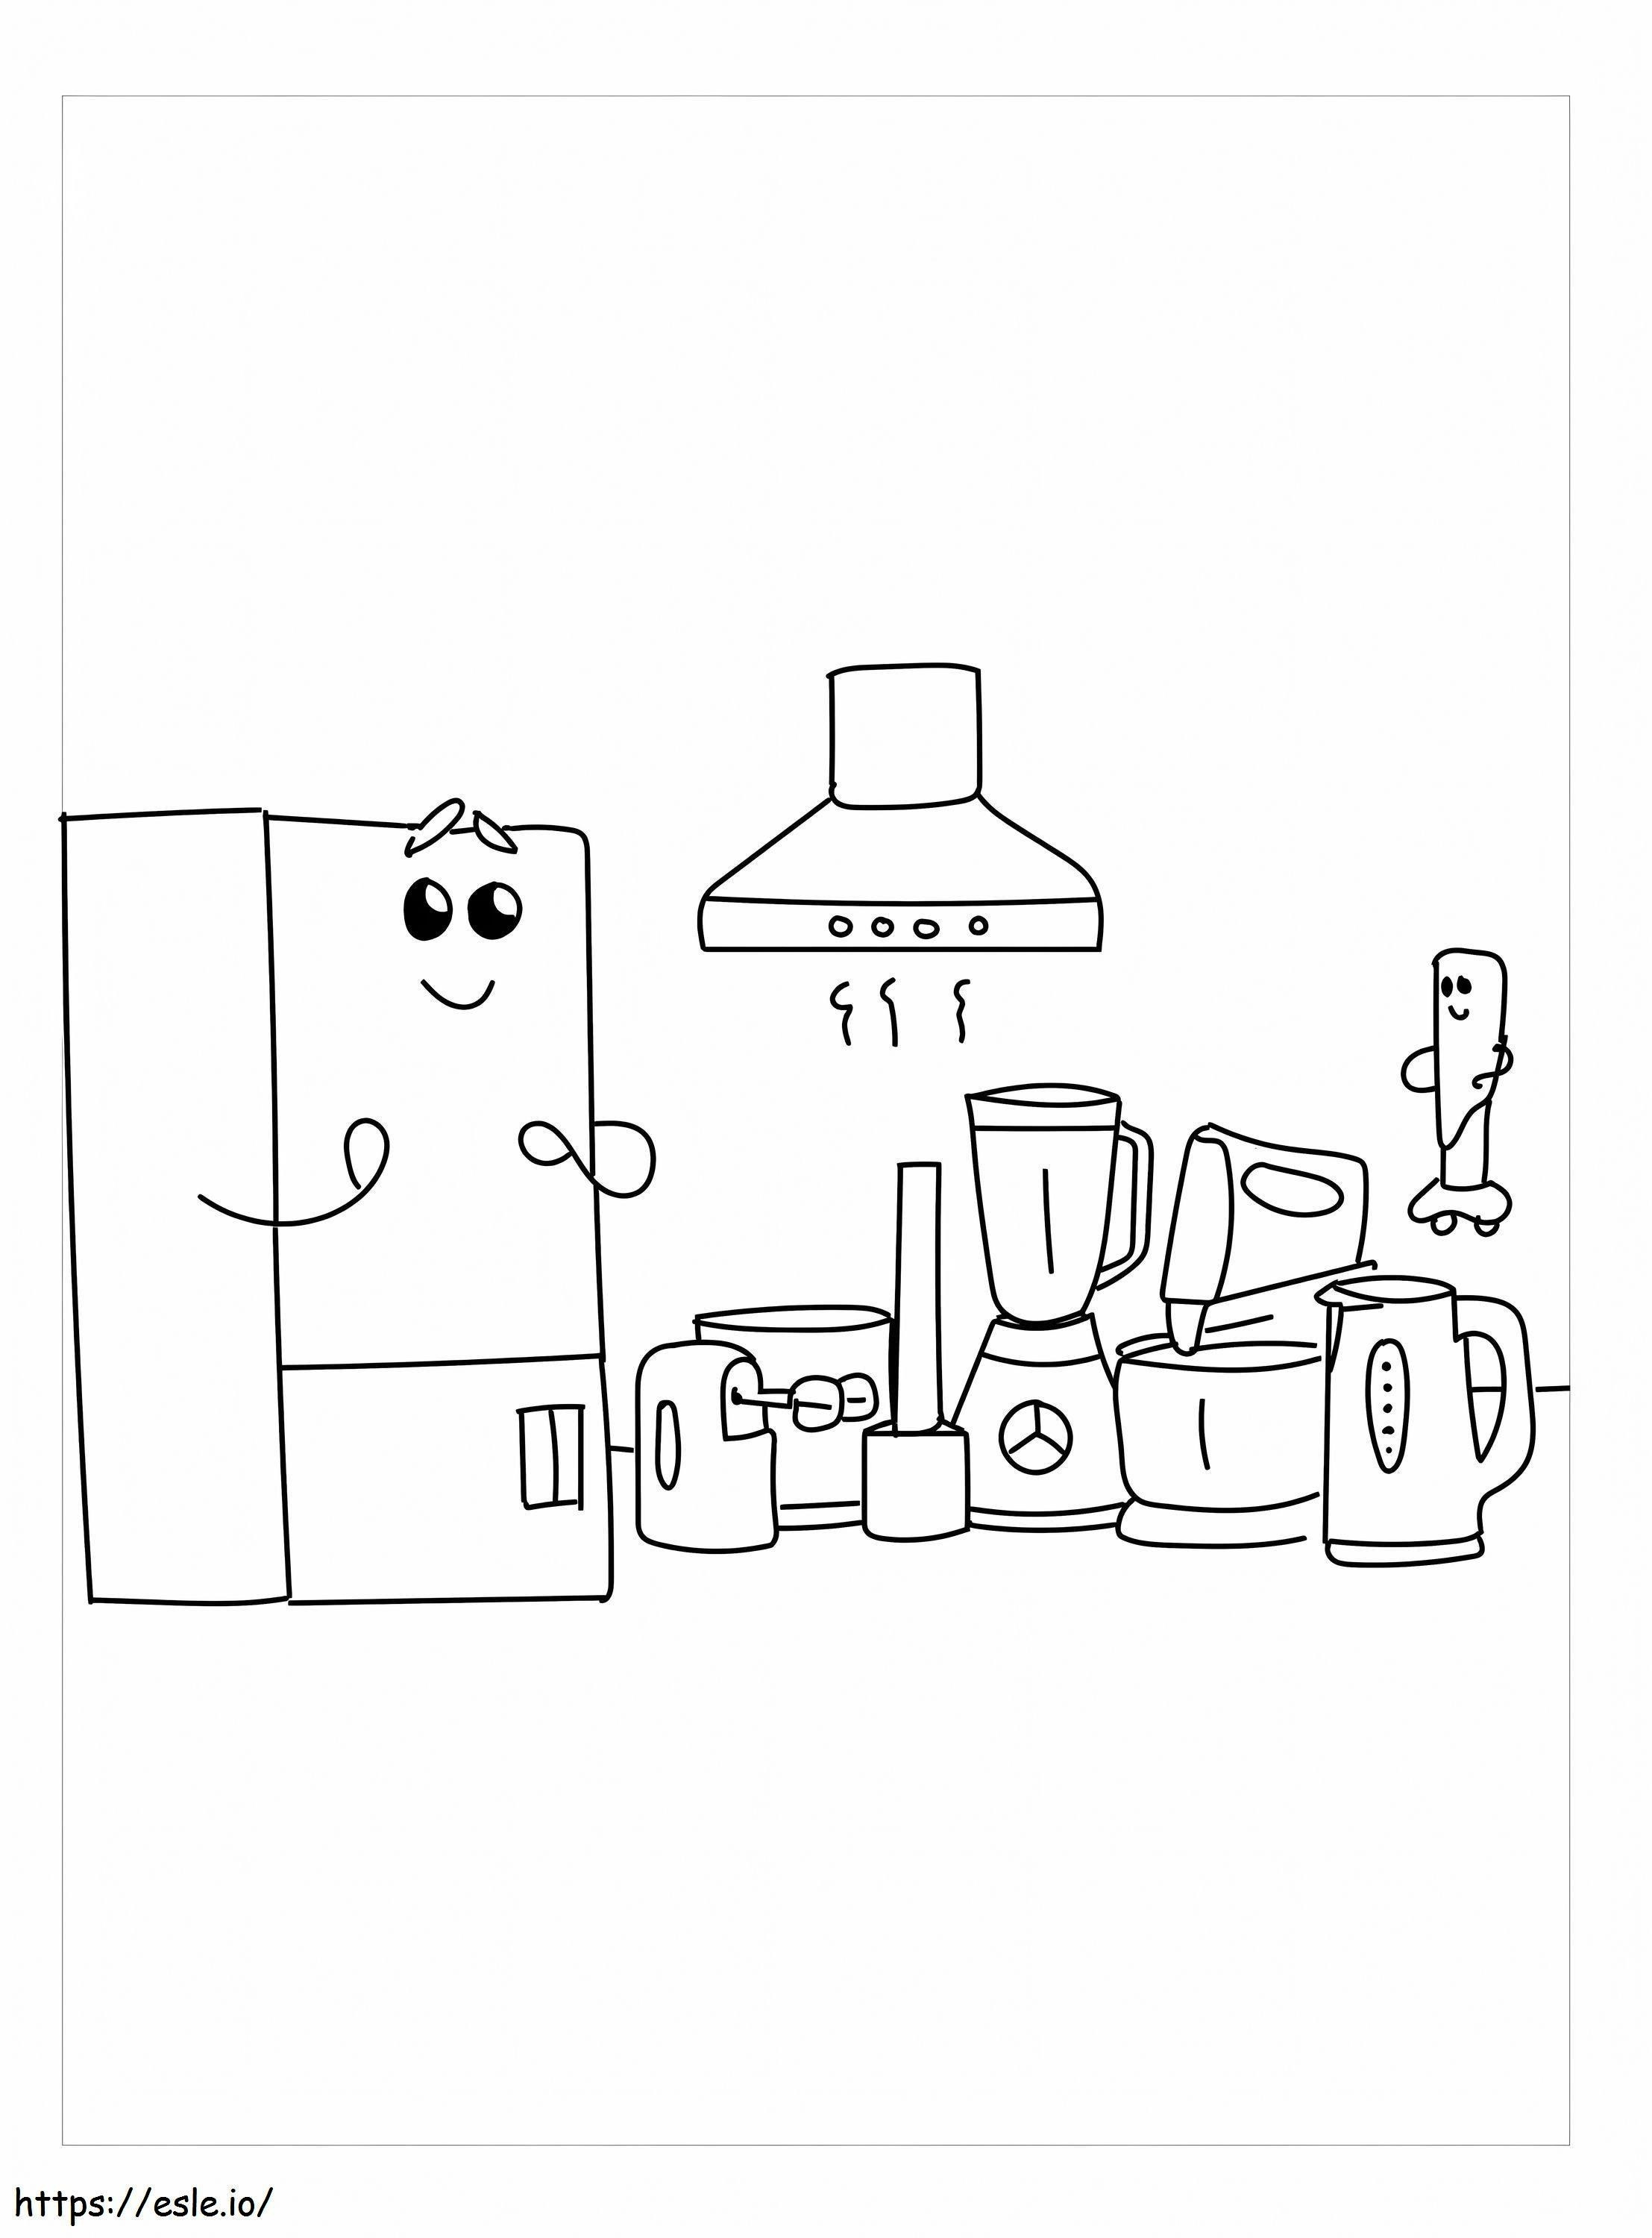 Kitchenware coloring page